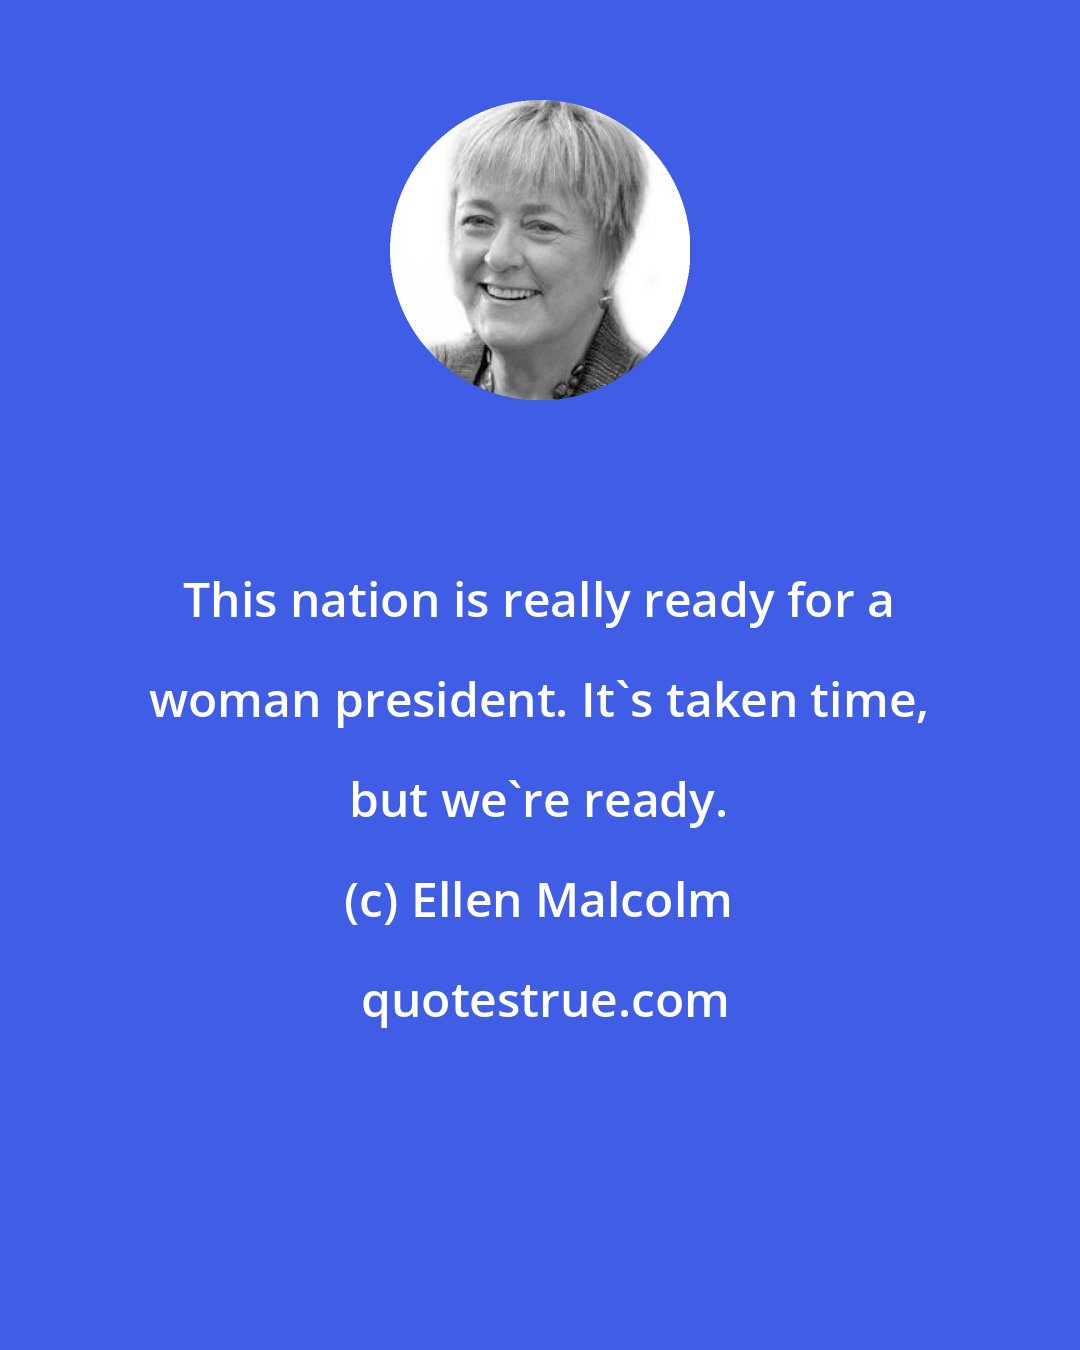 Ellen Malcolm: This nation is really ready for a woman president. It's taken time, but we're ready.